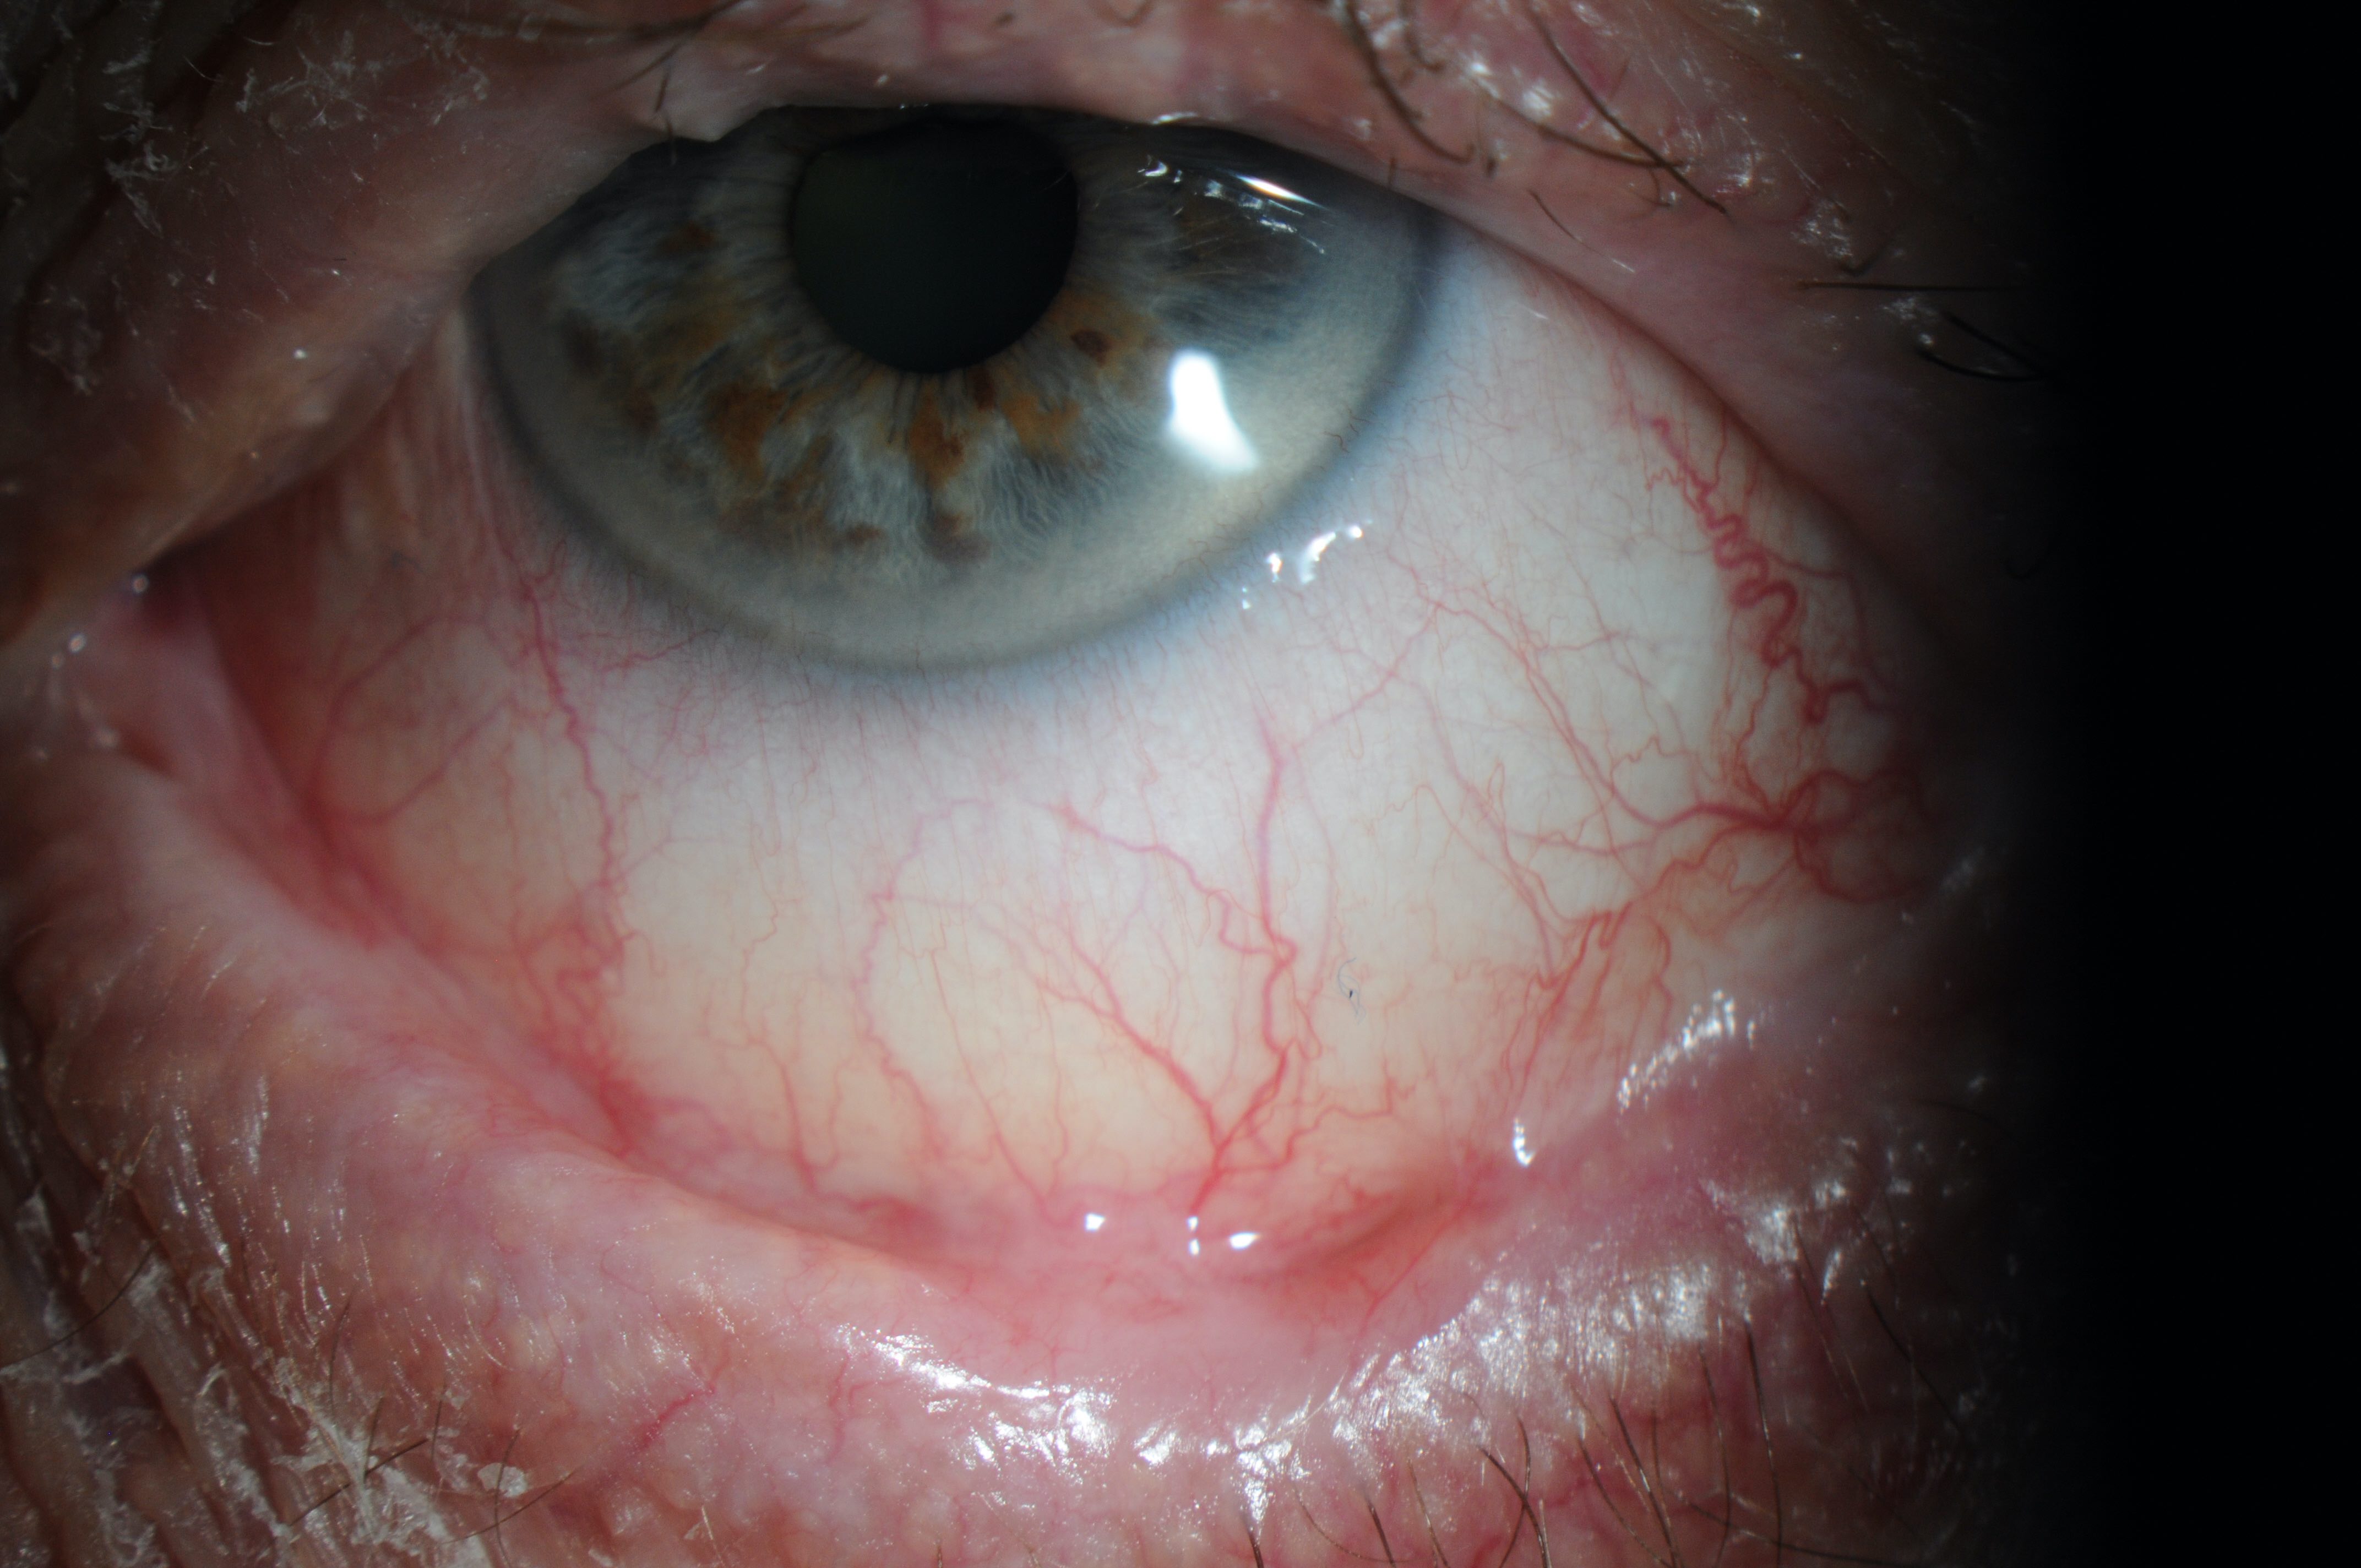 Atypical features such as chronic symptoms, relapsing/remitting course, and signs such as symblepharon, loss of the plica, shortening of conjunctival fornices suggest a non-viral cause of conjunctivitis